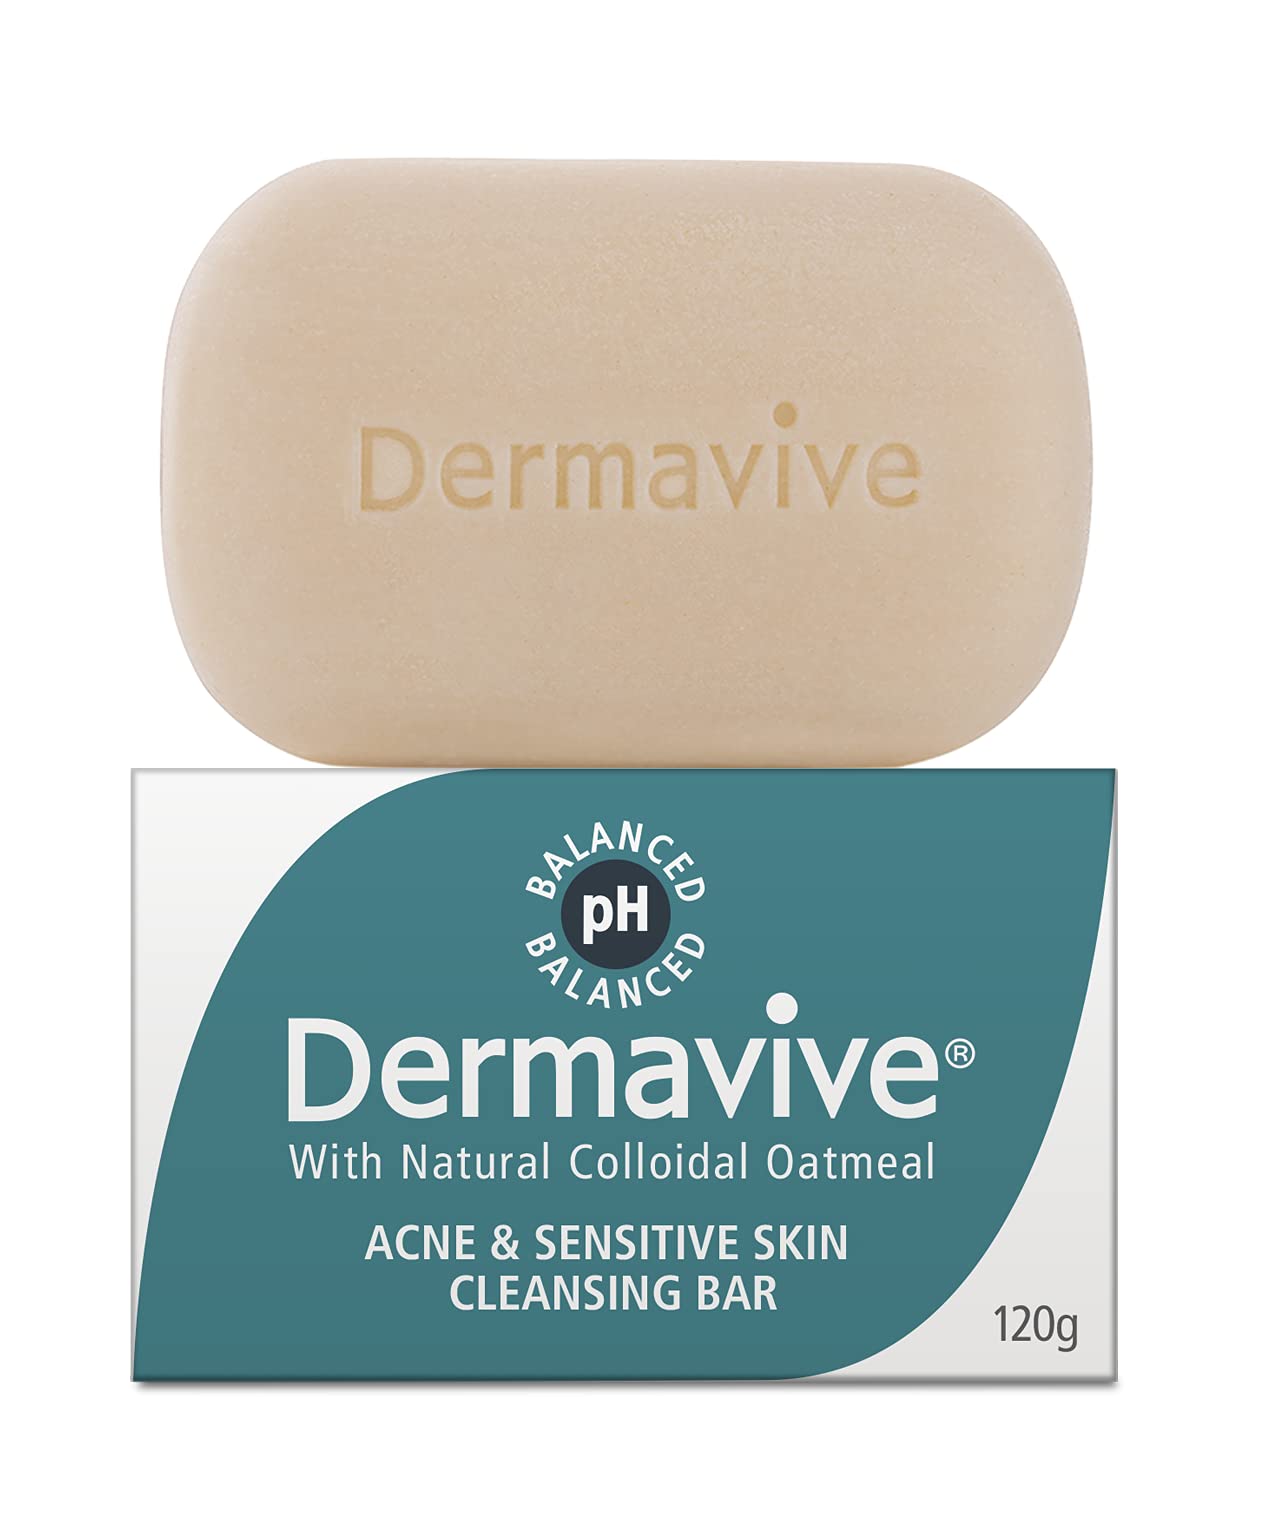 Dermavive Acne & Sensitive Skin Cleansing Bar - Acne-Prone Skin and Blemishes Cleanser Soap Bar with Natural Colloidal Oatmeal, 120g (Pack of 1)